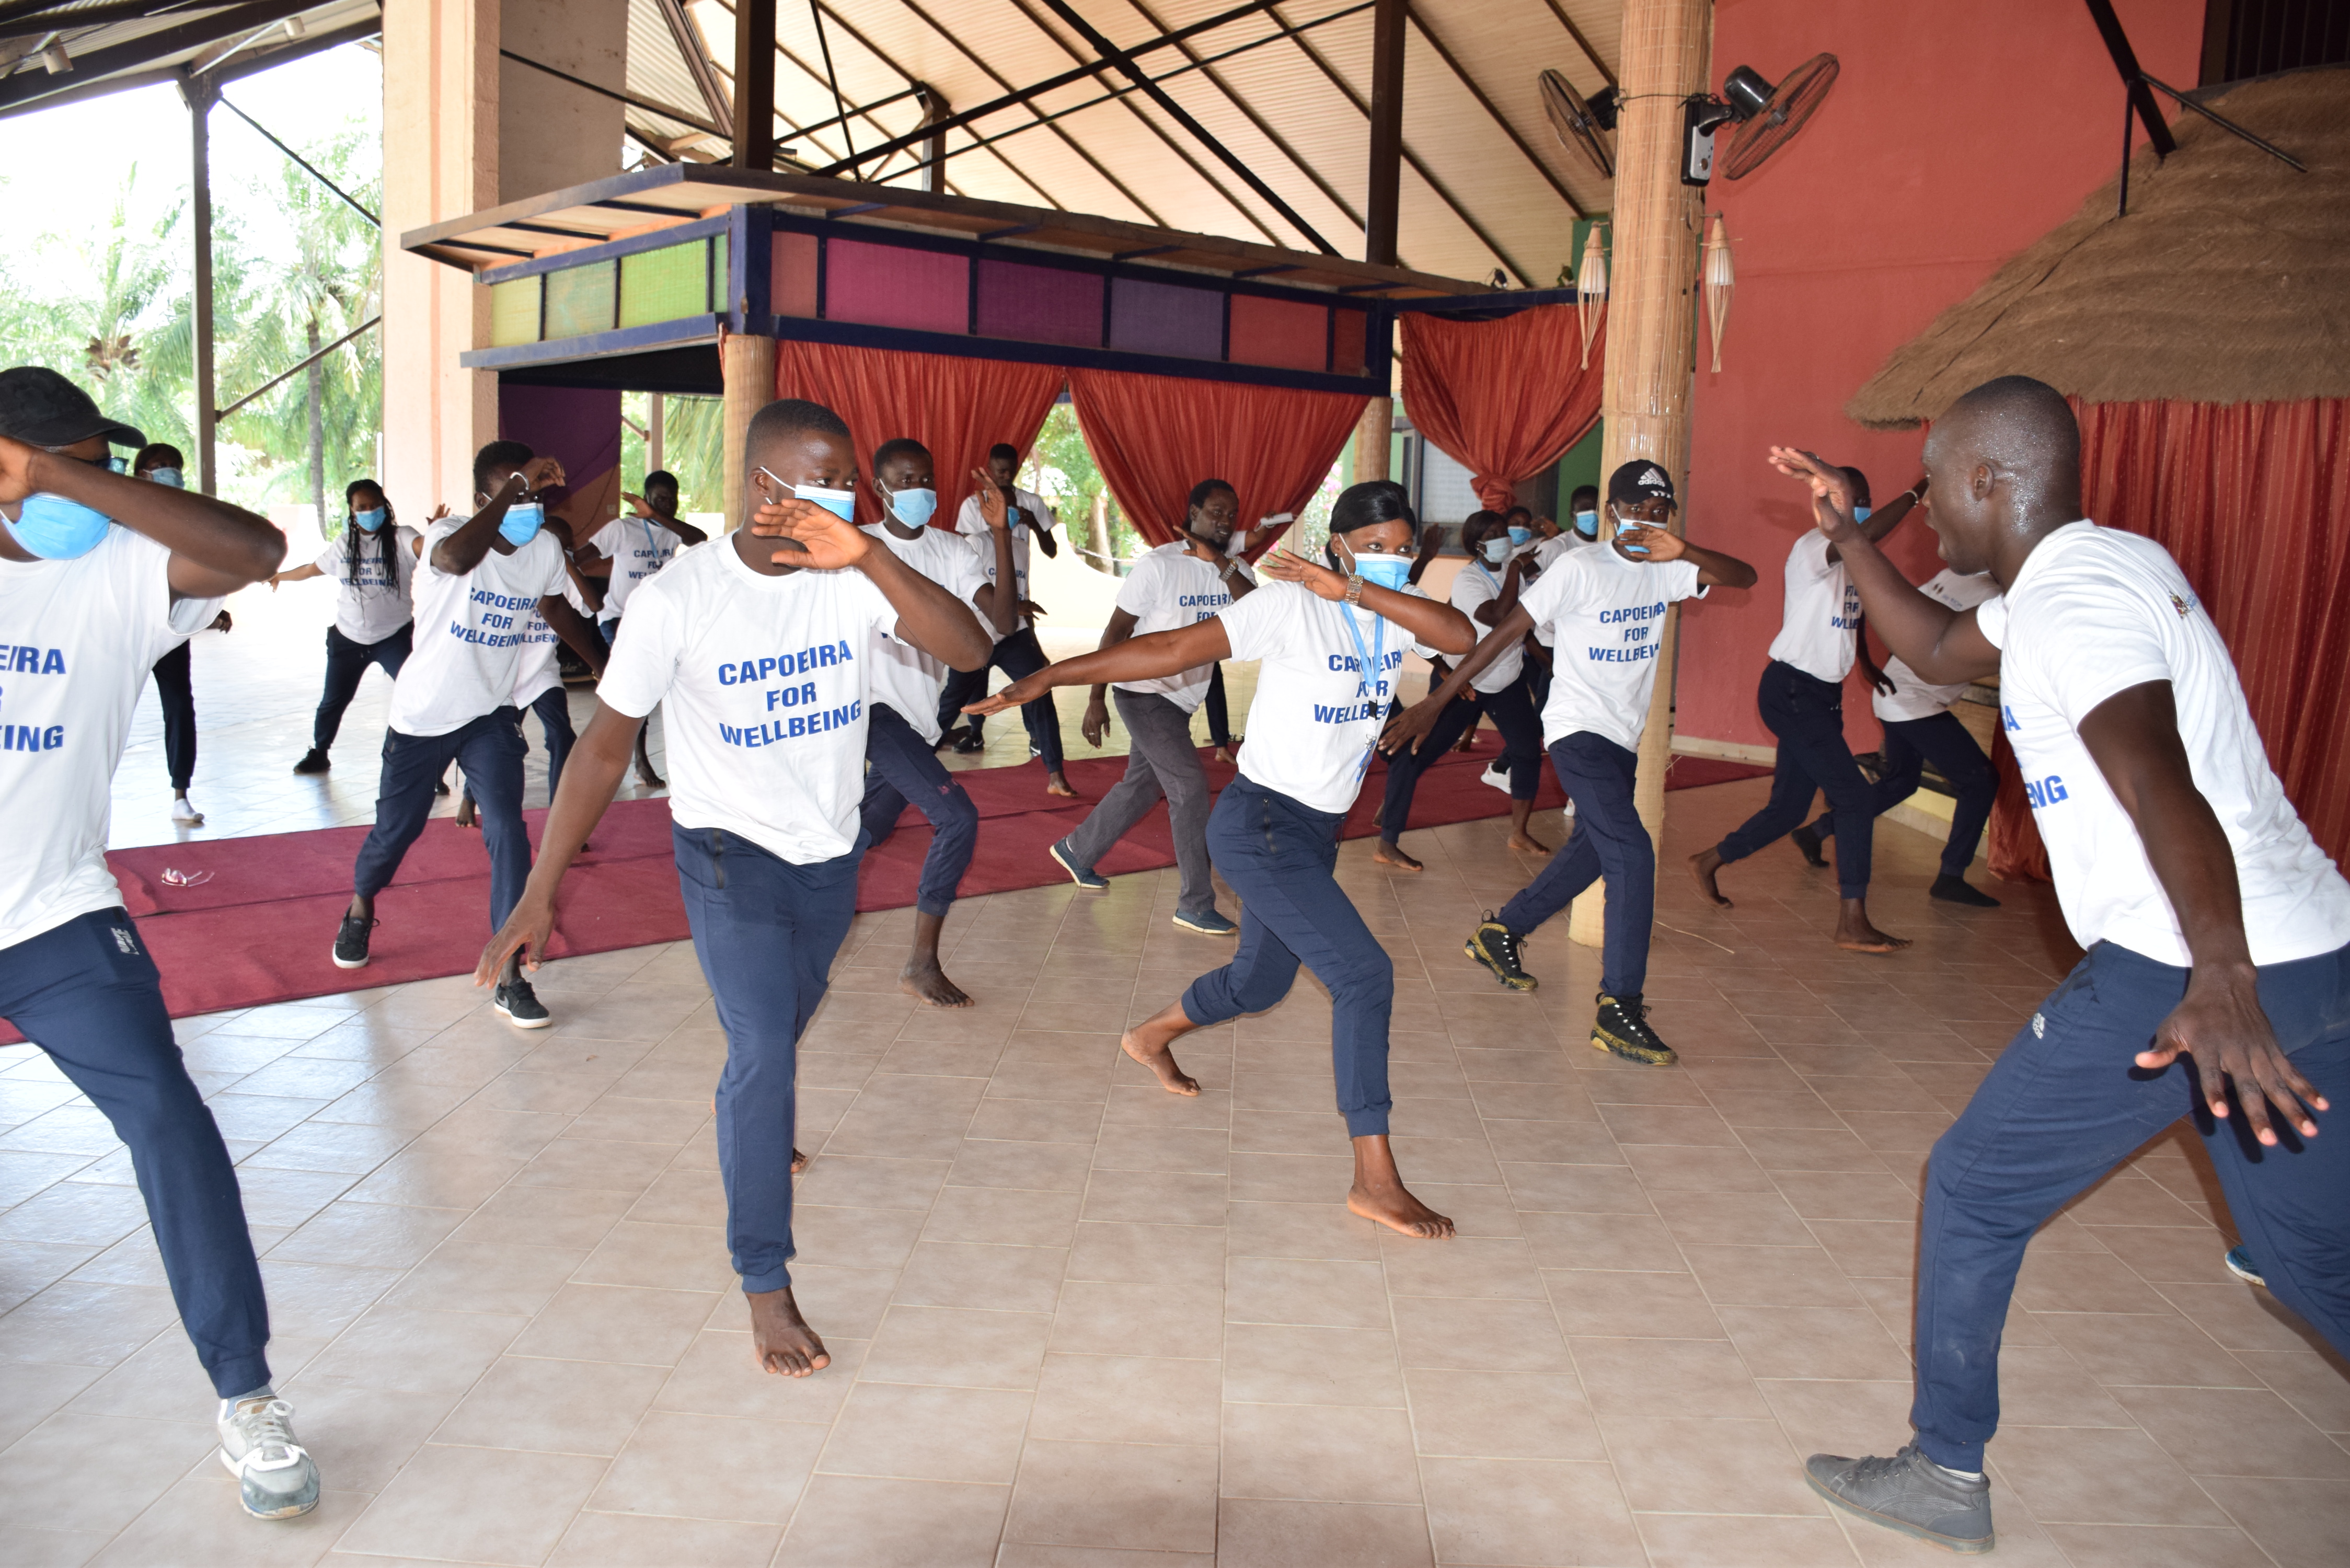 migrants as messenger the gambia capoeira mental health